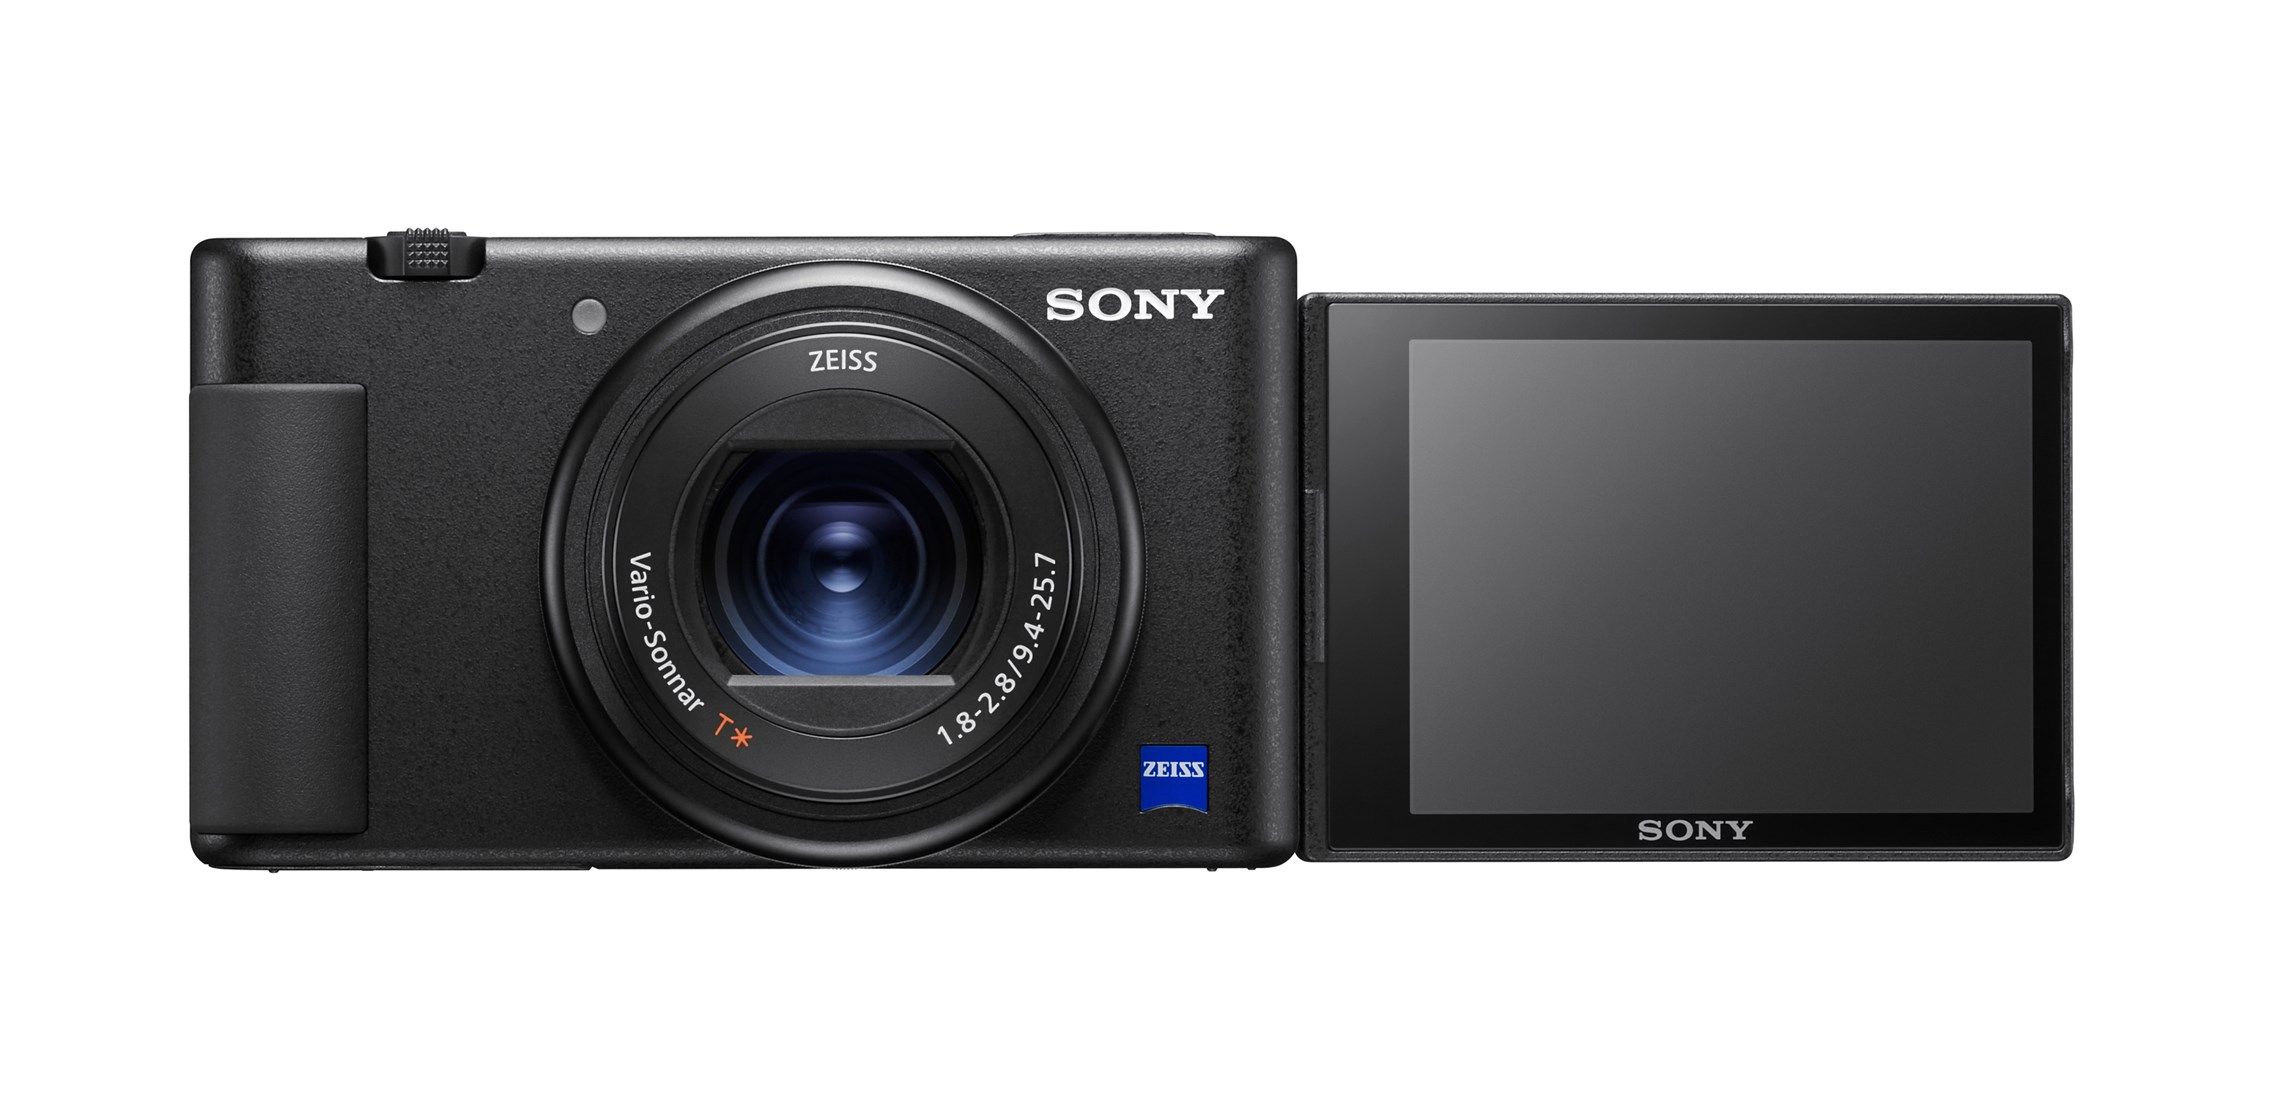 Sony ZV-1 Compact Digital Camera 4K UHD - Black - Perfect for Vloggers - Product Photo 4 - Front view of the camera with the screen extended